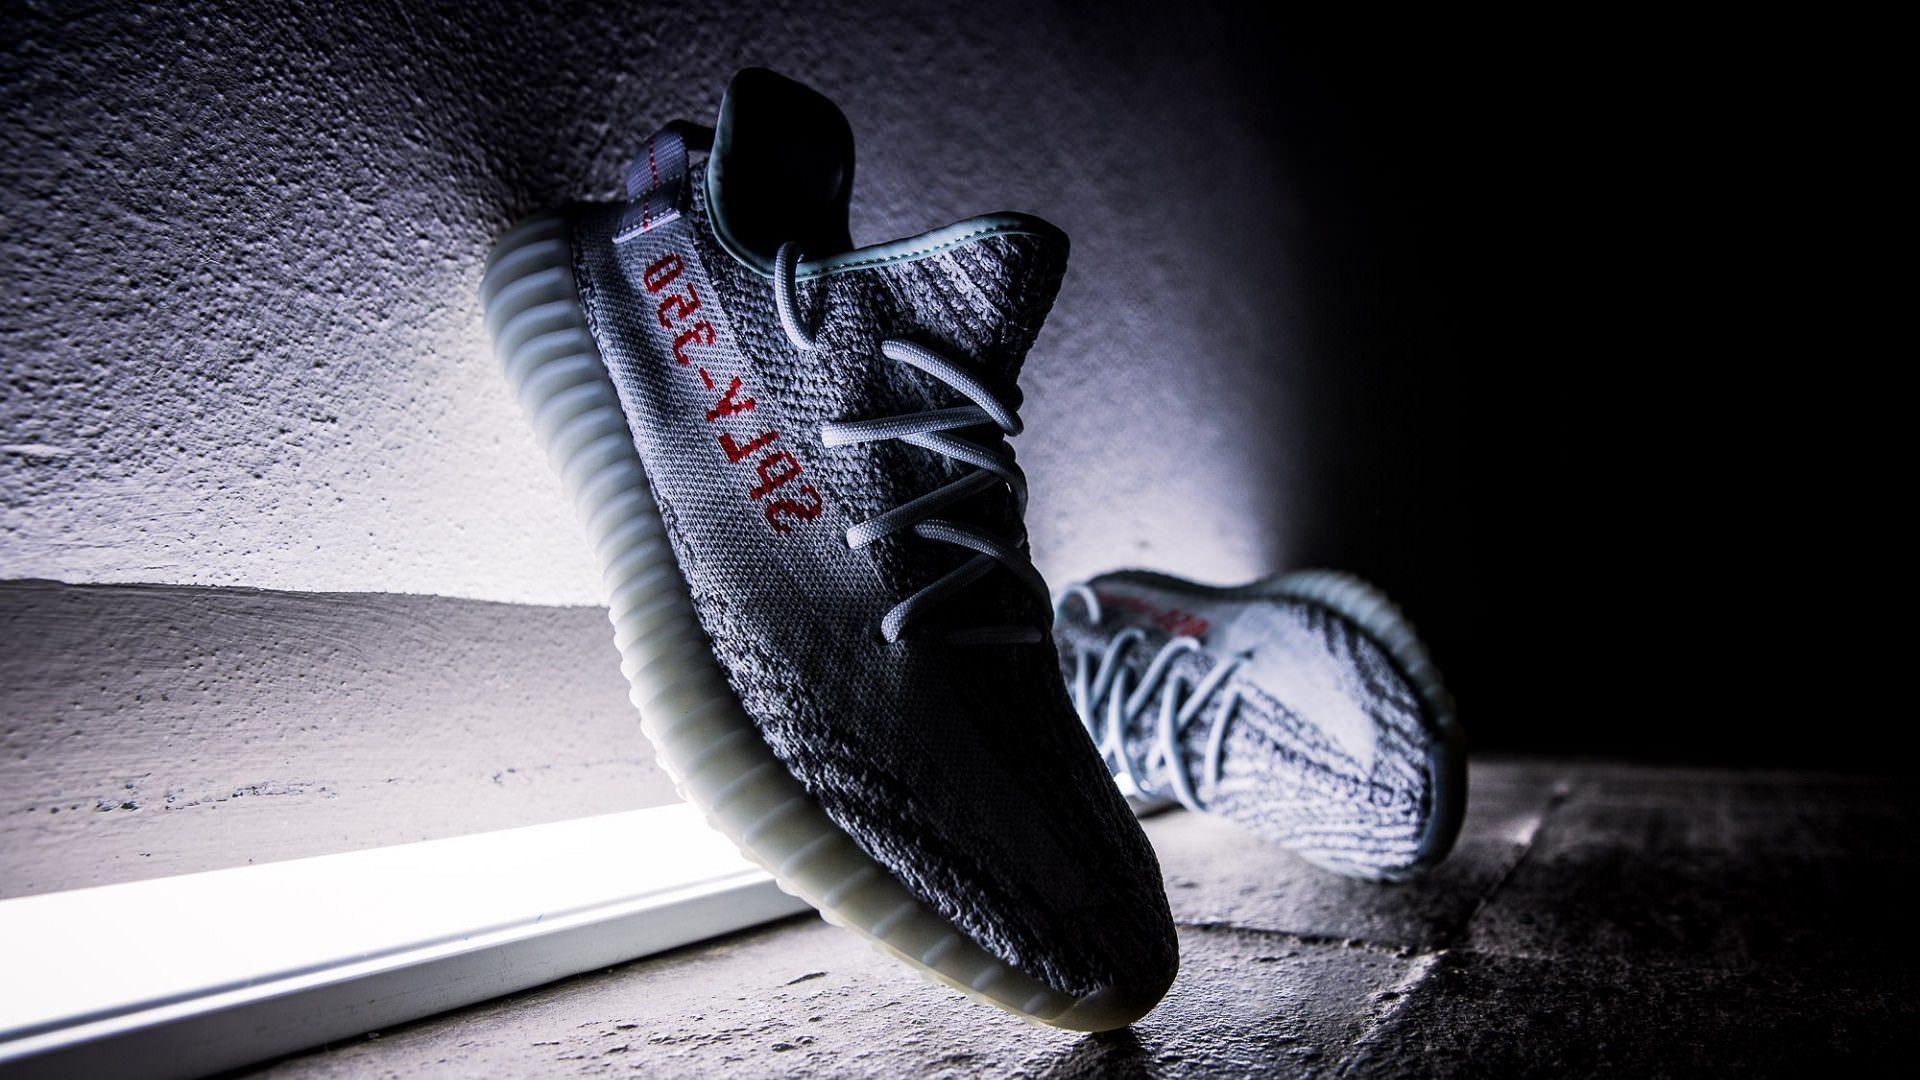 New Yeezys: The New Yeezy Boost 350 V2 Release Update